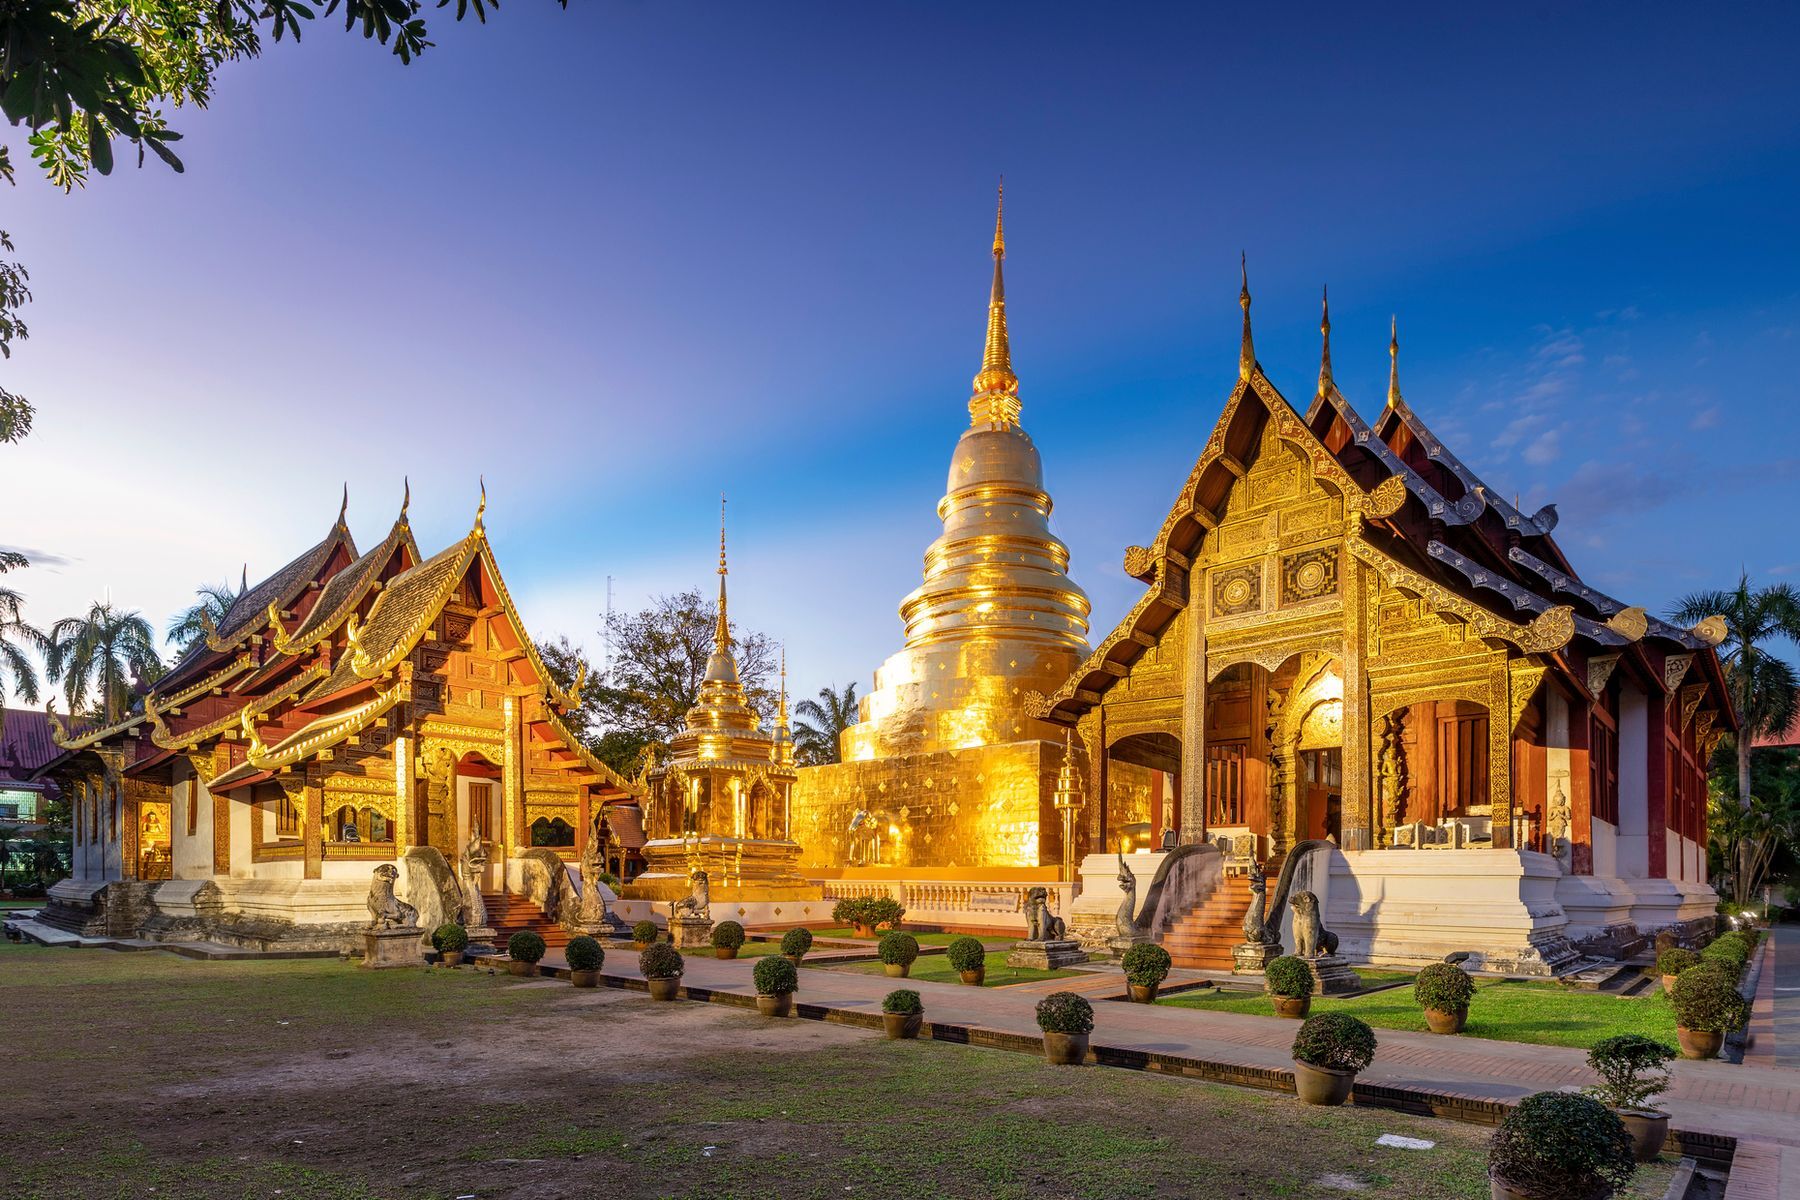 <p>Former capital of the Lanna kingdom, the city of <a href="https://www.tourismthailand.org/Destinations/Provinces/Chiang-Mai/101" rel="noreferrer noopener">Chiang</a> <a href="https://www.tourismthailand.org/Destinations/Provinces/Chiang-Mai/101" rel="noreferrer noopener">Mai</a> sits at the foot of a mountain range in northern Thailand. Frugal travellers wishing to immerse themselves in Thai culture will be delighted to find local products sold at low prices in the city’s markets. <a href="https://migrationology.com/warorot-market-chiang-mai/" rel="noreferrer noopener">Warorot</a>, for instance, offers a vast selection of regional foods while not attracting many tourists. Chiang Mai is also home to numerous Buddhist temples, typically free to visit (if not, entry fees are very low). <a href="https://www.tourismthailand.org/Attraction/wat-chiang-man" rel="noreferrer noopener">Wat Chiang Man</a>, in particular, is worth the trip. Constructed in the 13th century, it’s the city’s oldest temple. Those visiting Chiang Mai in mid-April will have the opportunity to participate in the <a href="https://ich.unesco.org/en/RL/songkran-in-thailand-traditional-thai-new-year-festival-01719" rel="noreferrer noopener">Songkran</a> festivities. Just be ready to ring in Thailand’s new year with a splash of water!</p>